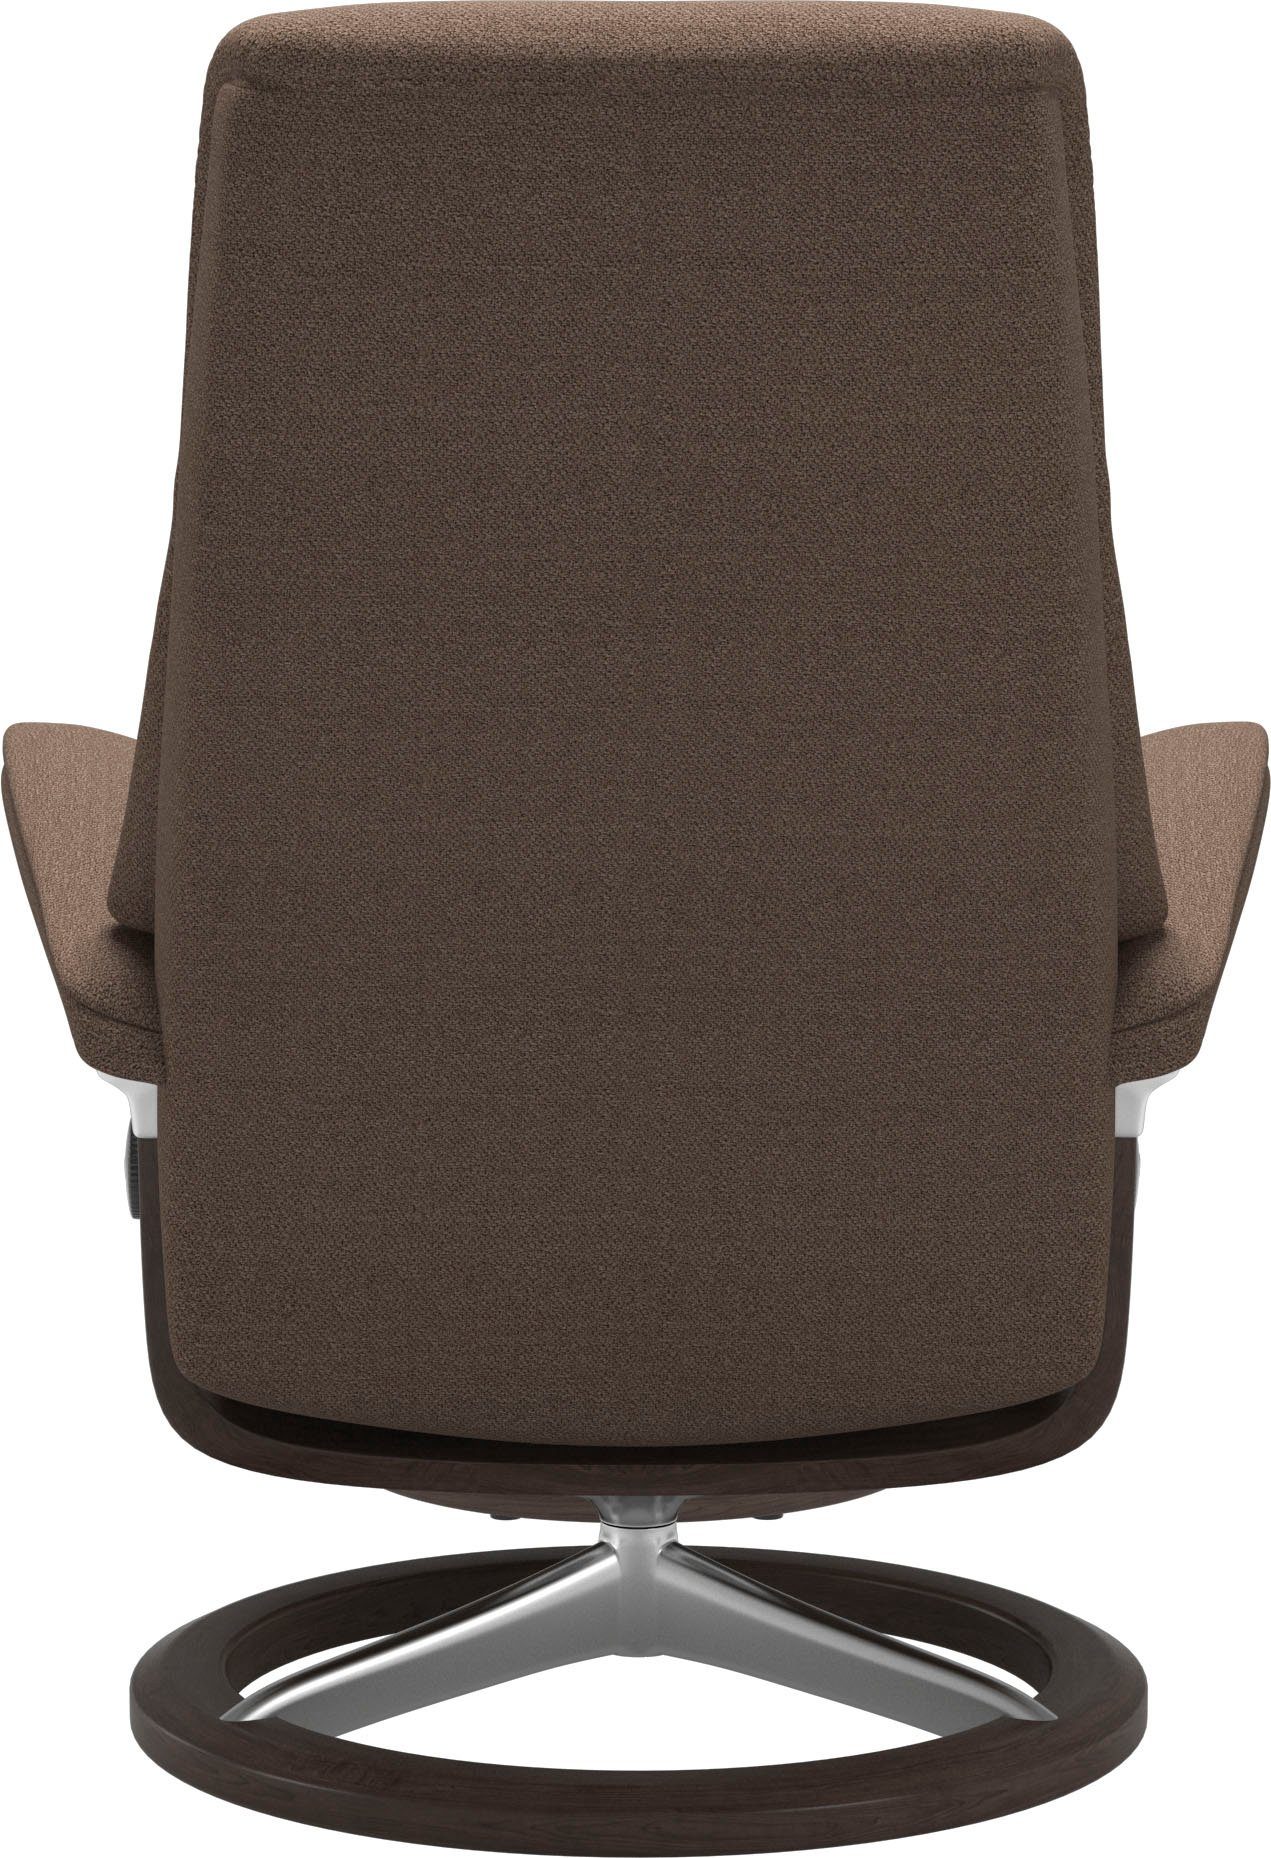 Base, Signature Stressless® L,Gestell Größe mit Wenge Relaxsessel View,